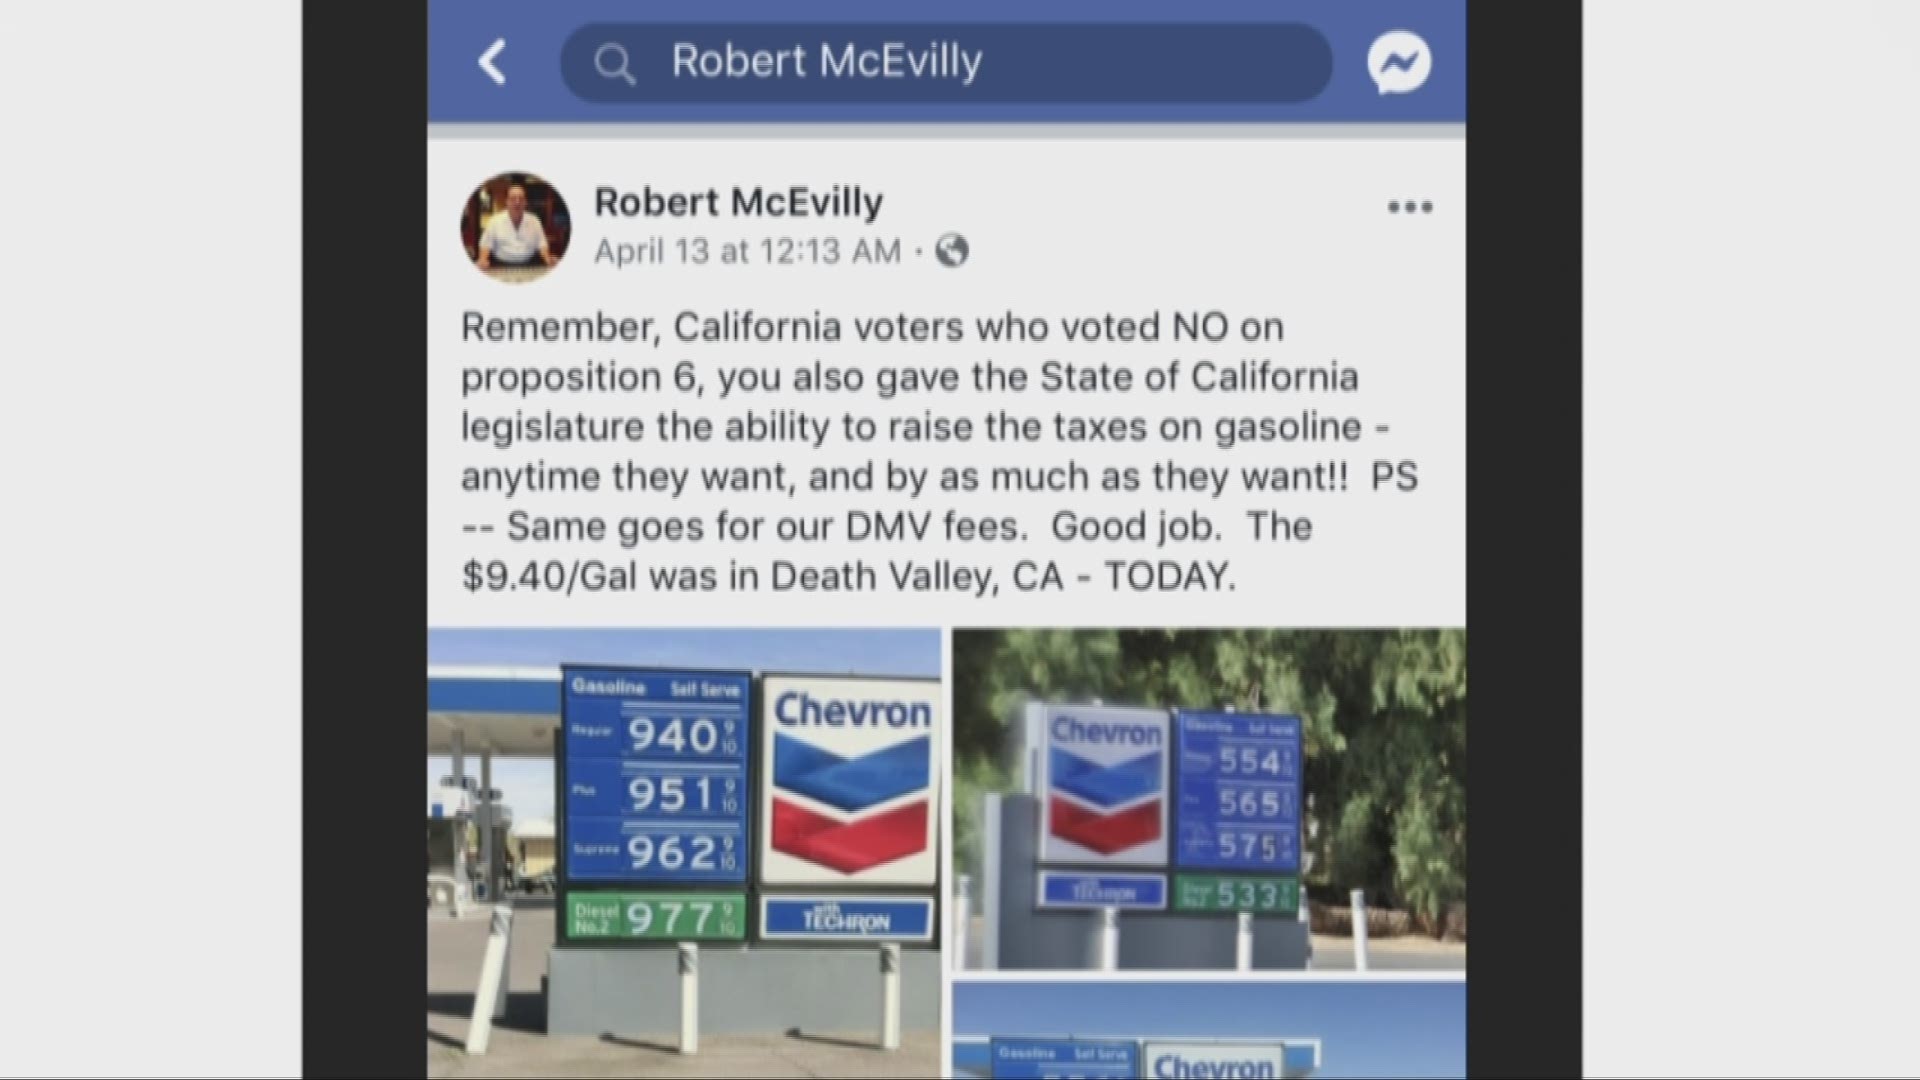 A Facebook commenting on gas prices over $9 in California's Death Valley have made the rounds on social media, but did gas prices actually go that high? Chris Thomas verifies.